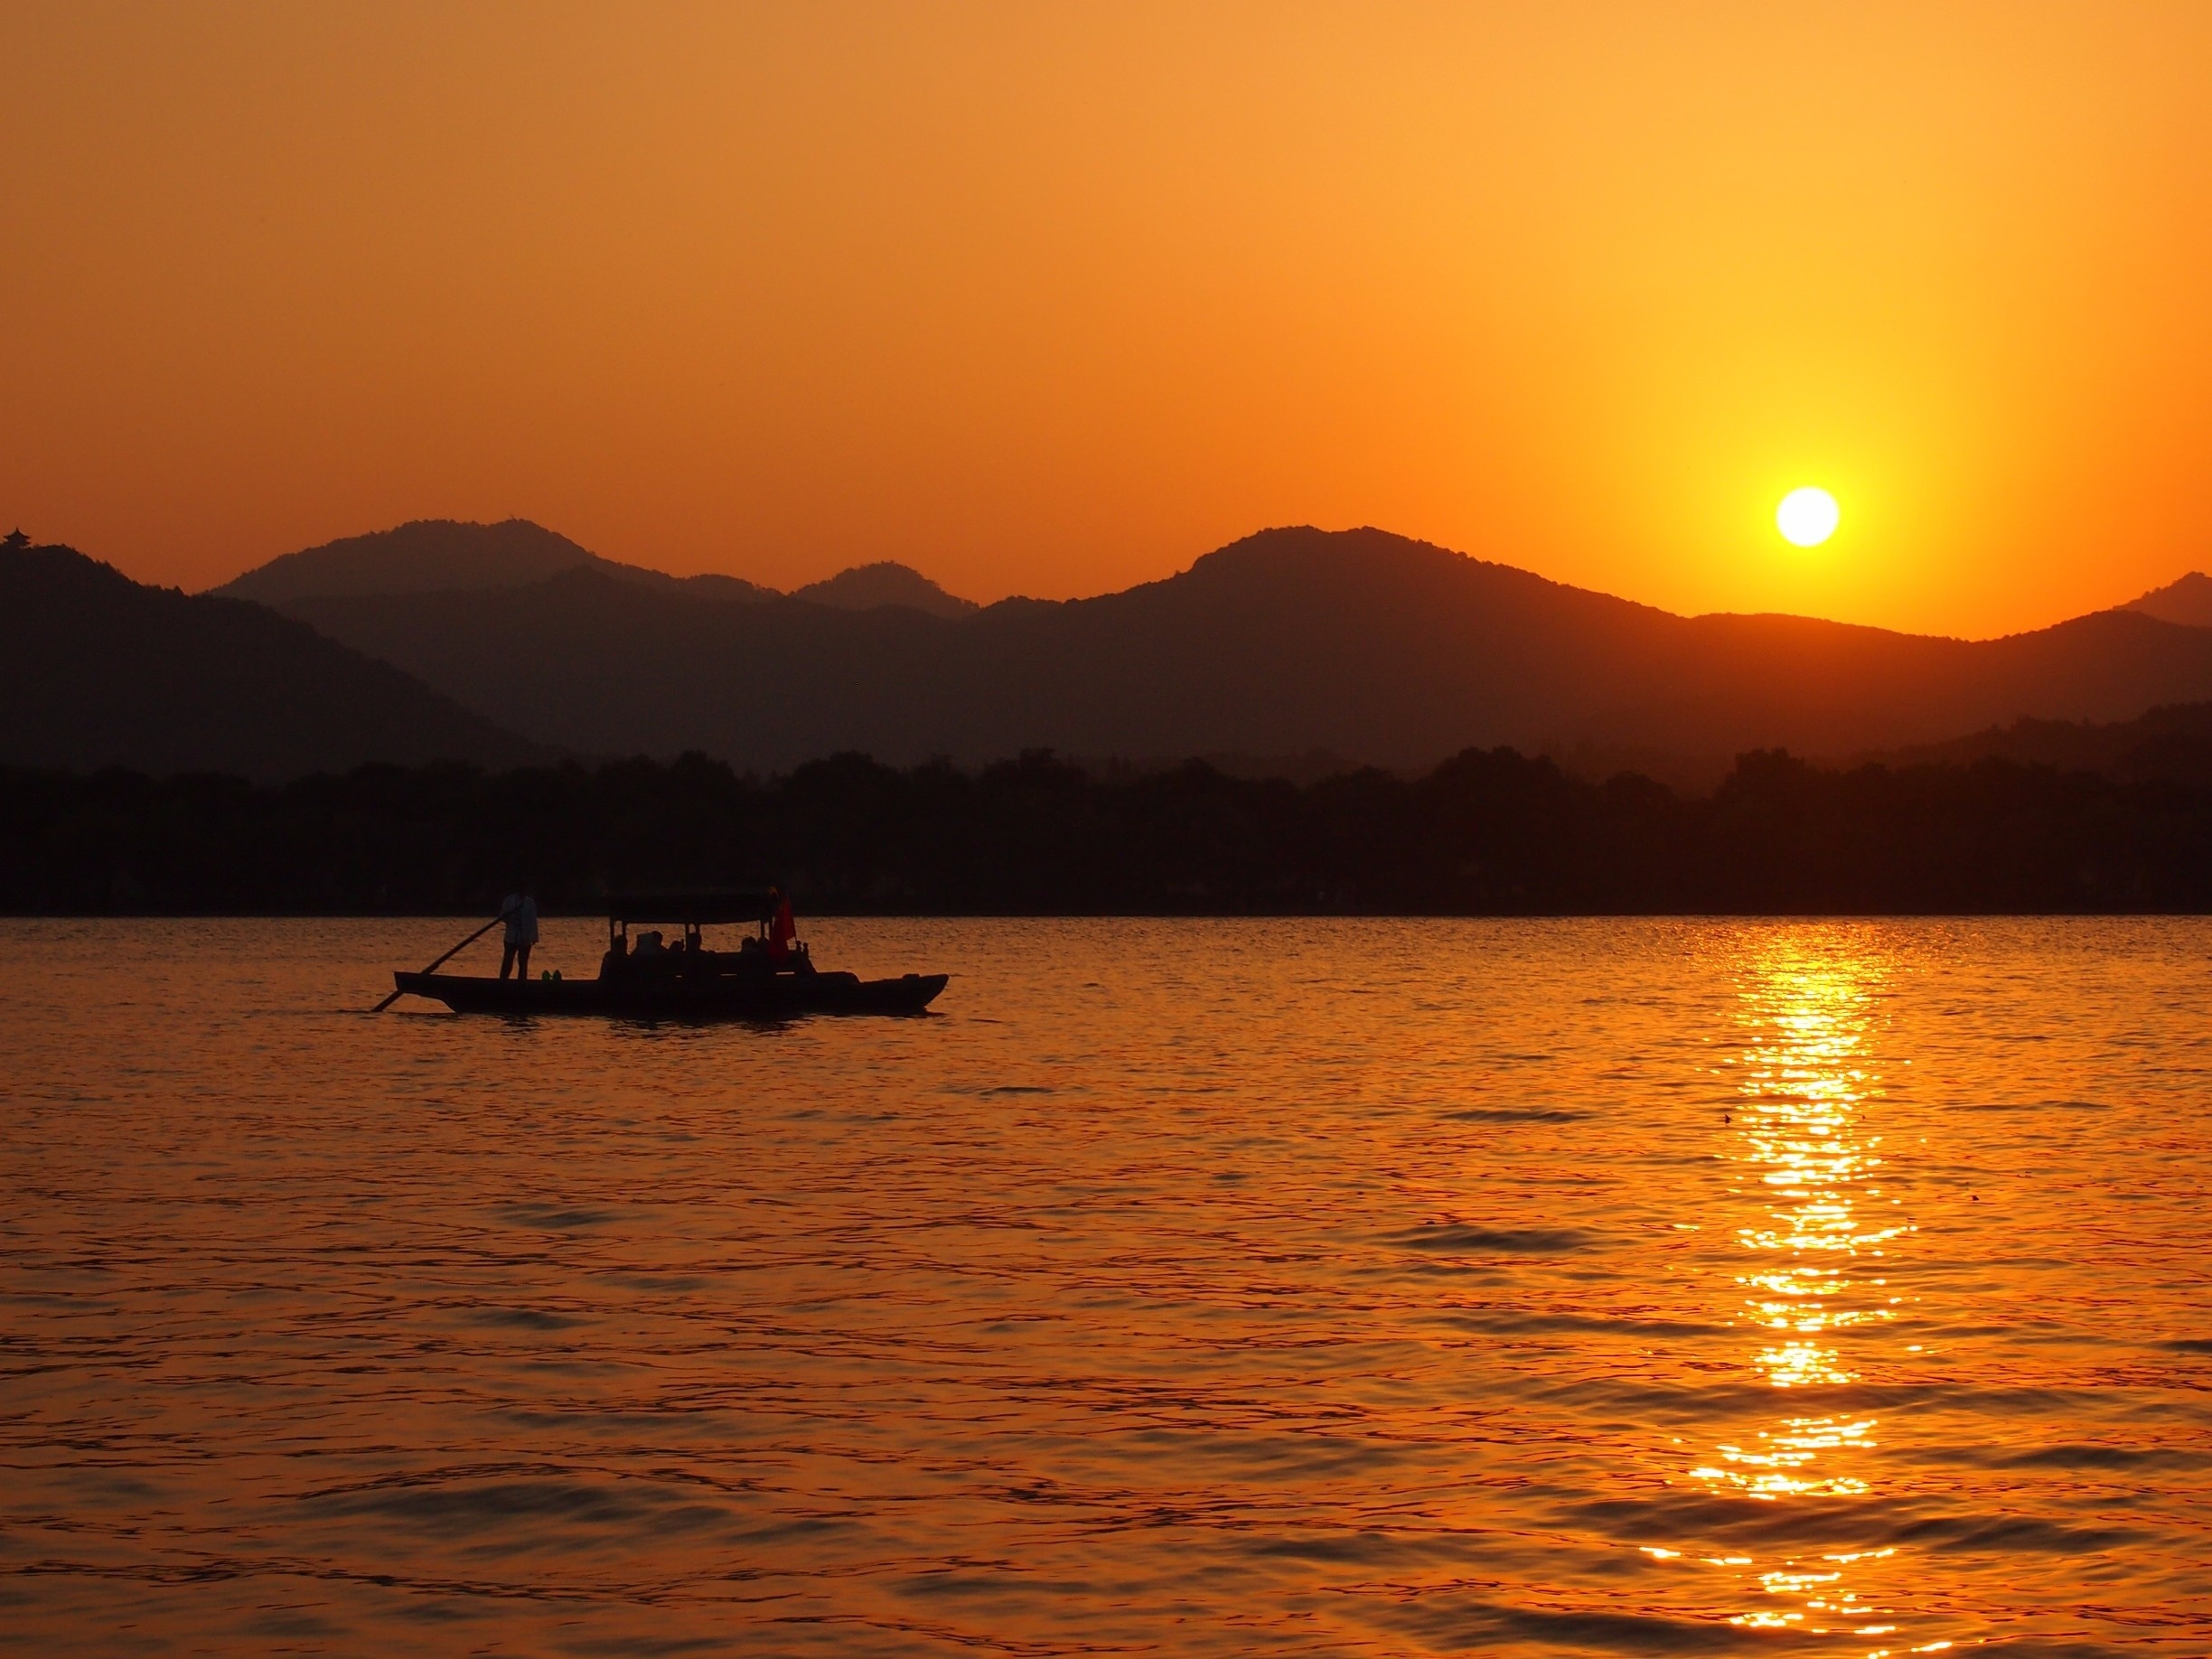 Sunset view of Hangzhou's beautiful West Lake from Xiao Ying island, also called "The three ponds mirroring the Moon".